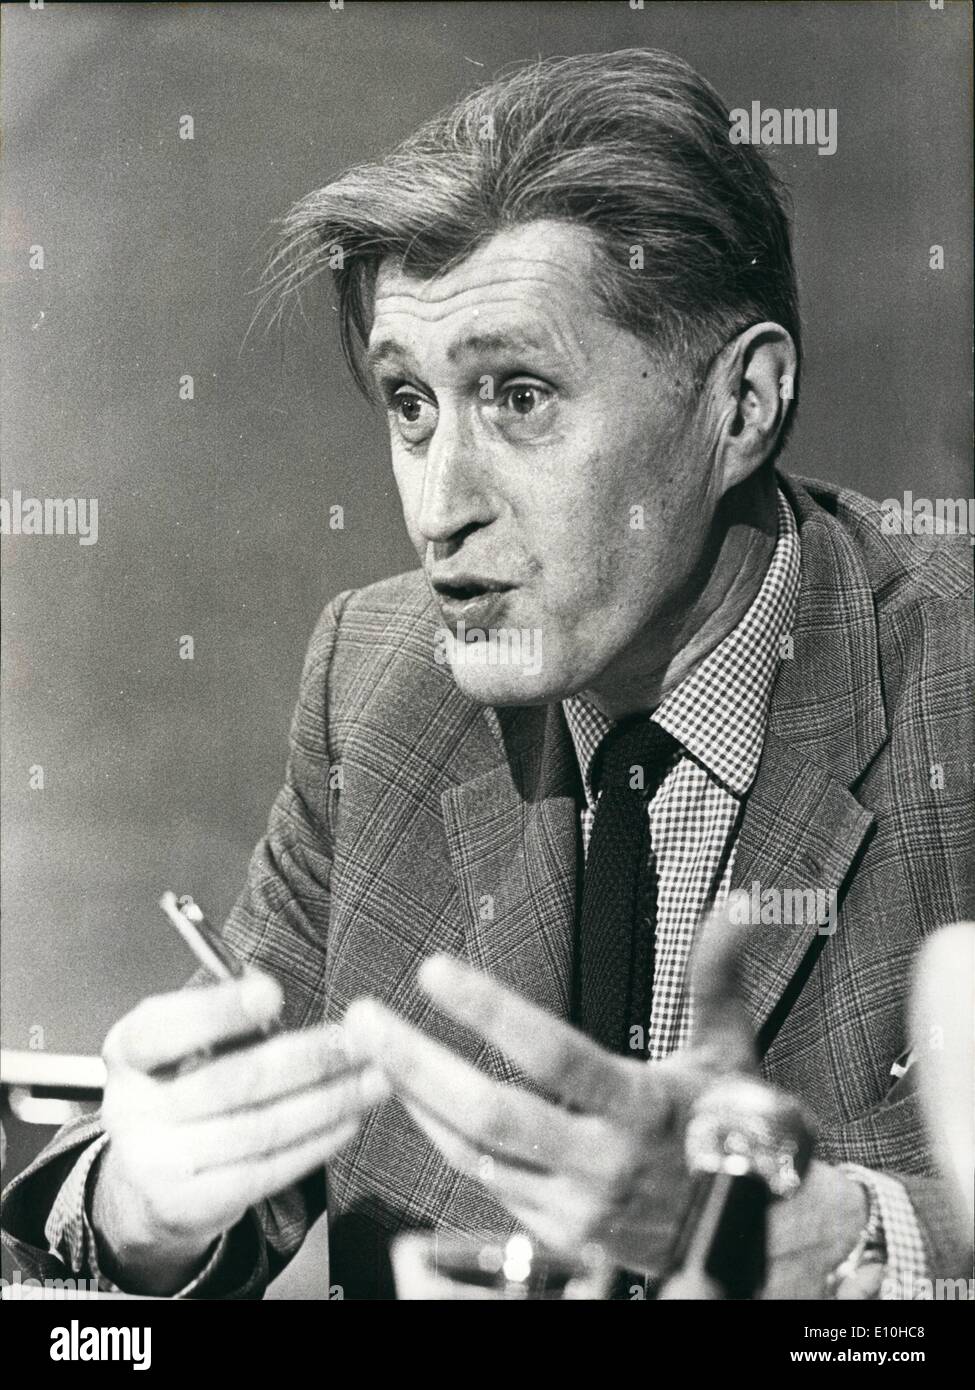 Feb. 02, 1973 - 'Abortion' Gynaecologist Released From Jail: Belgian Gynaecologist Dr. Willy Peers imprisoned after a trial on the charge of preforming 300 abortions in his Namur Hospital was released under a suspended sentence. Photo Shows Dr. Willy Peers pictured during his press conference after his release. Stock Photo